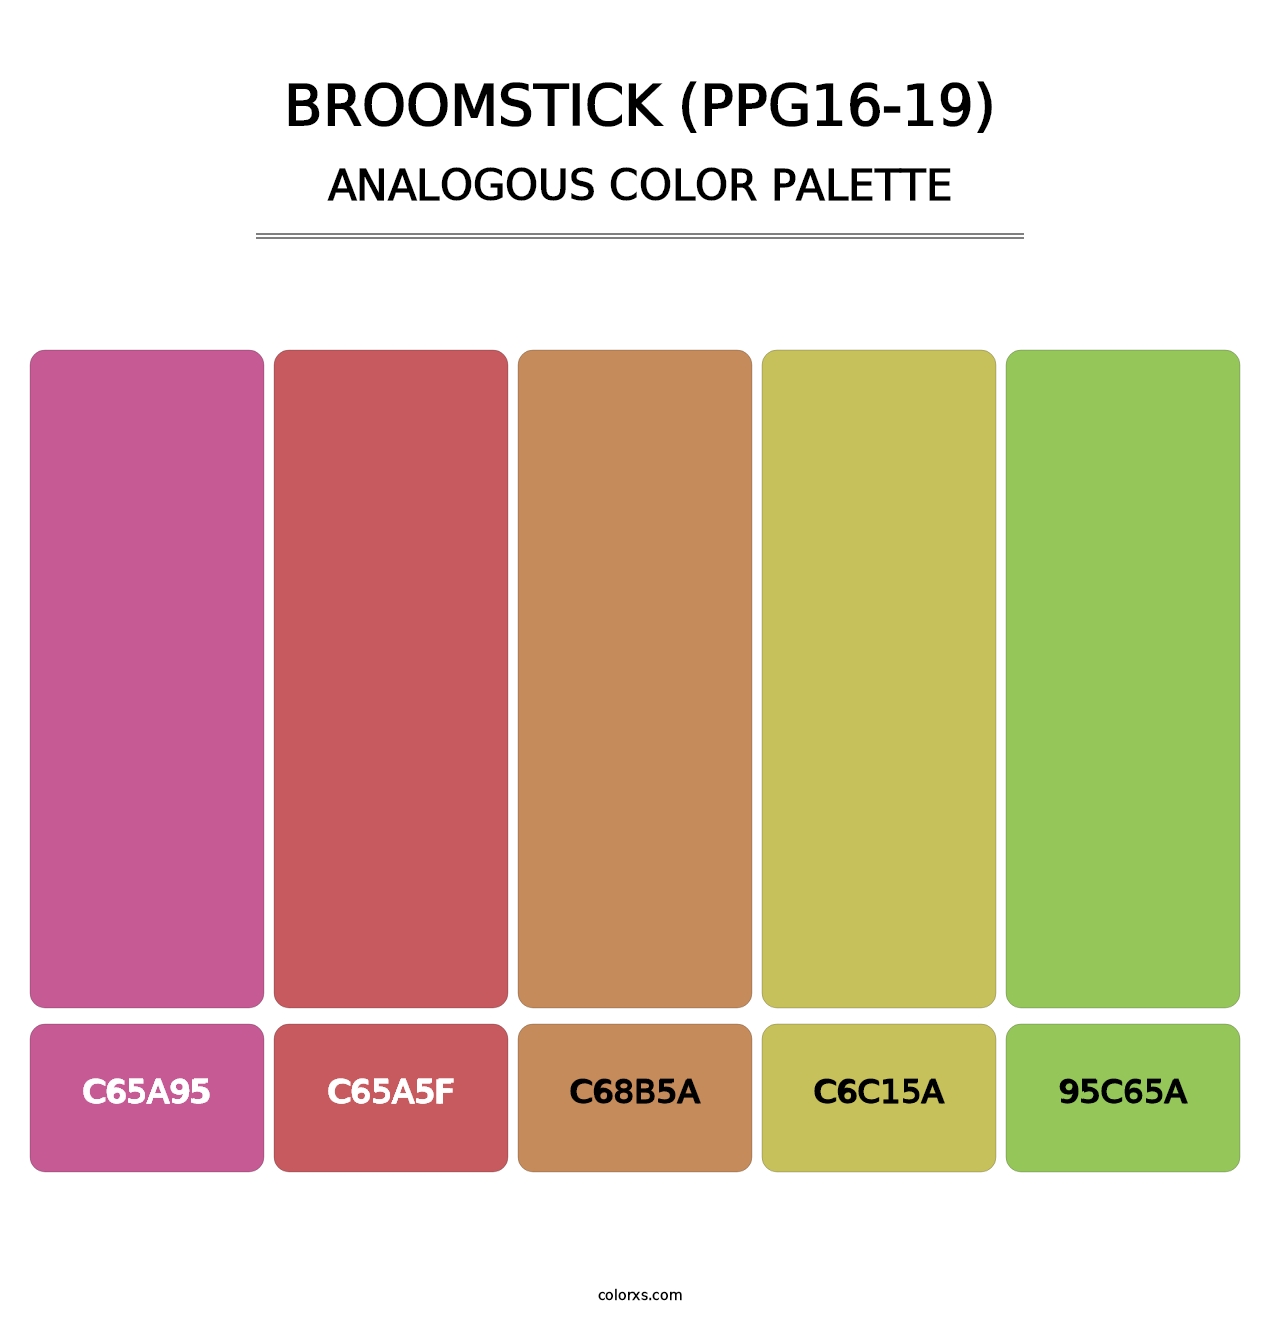 Broomstick (PPG16-19) - Analogous Color Palette